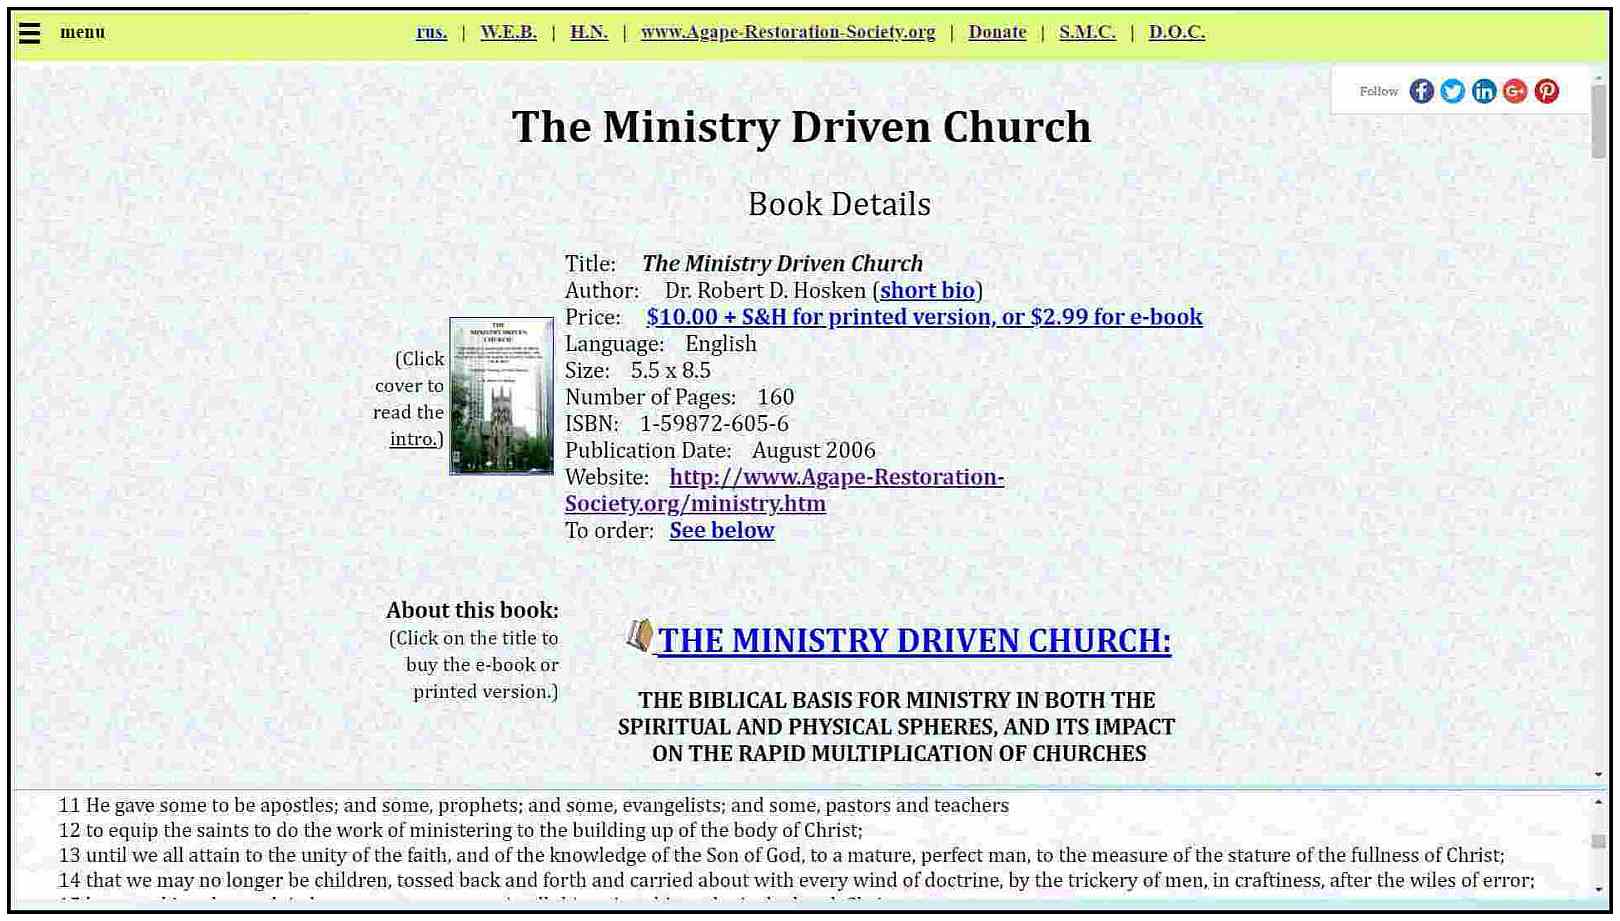 The Ministry Driven Church